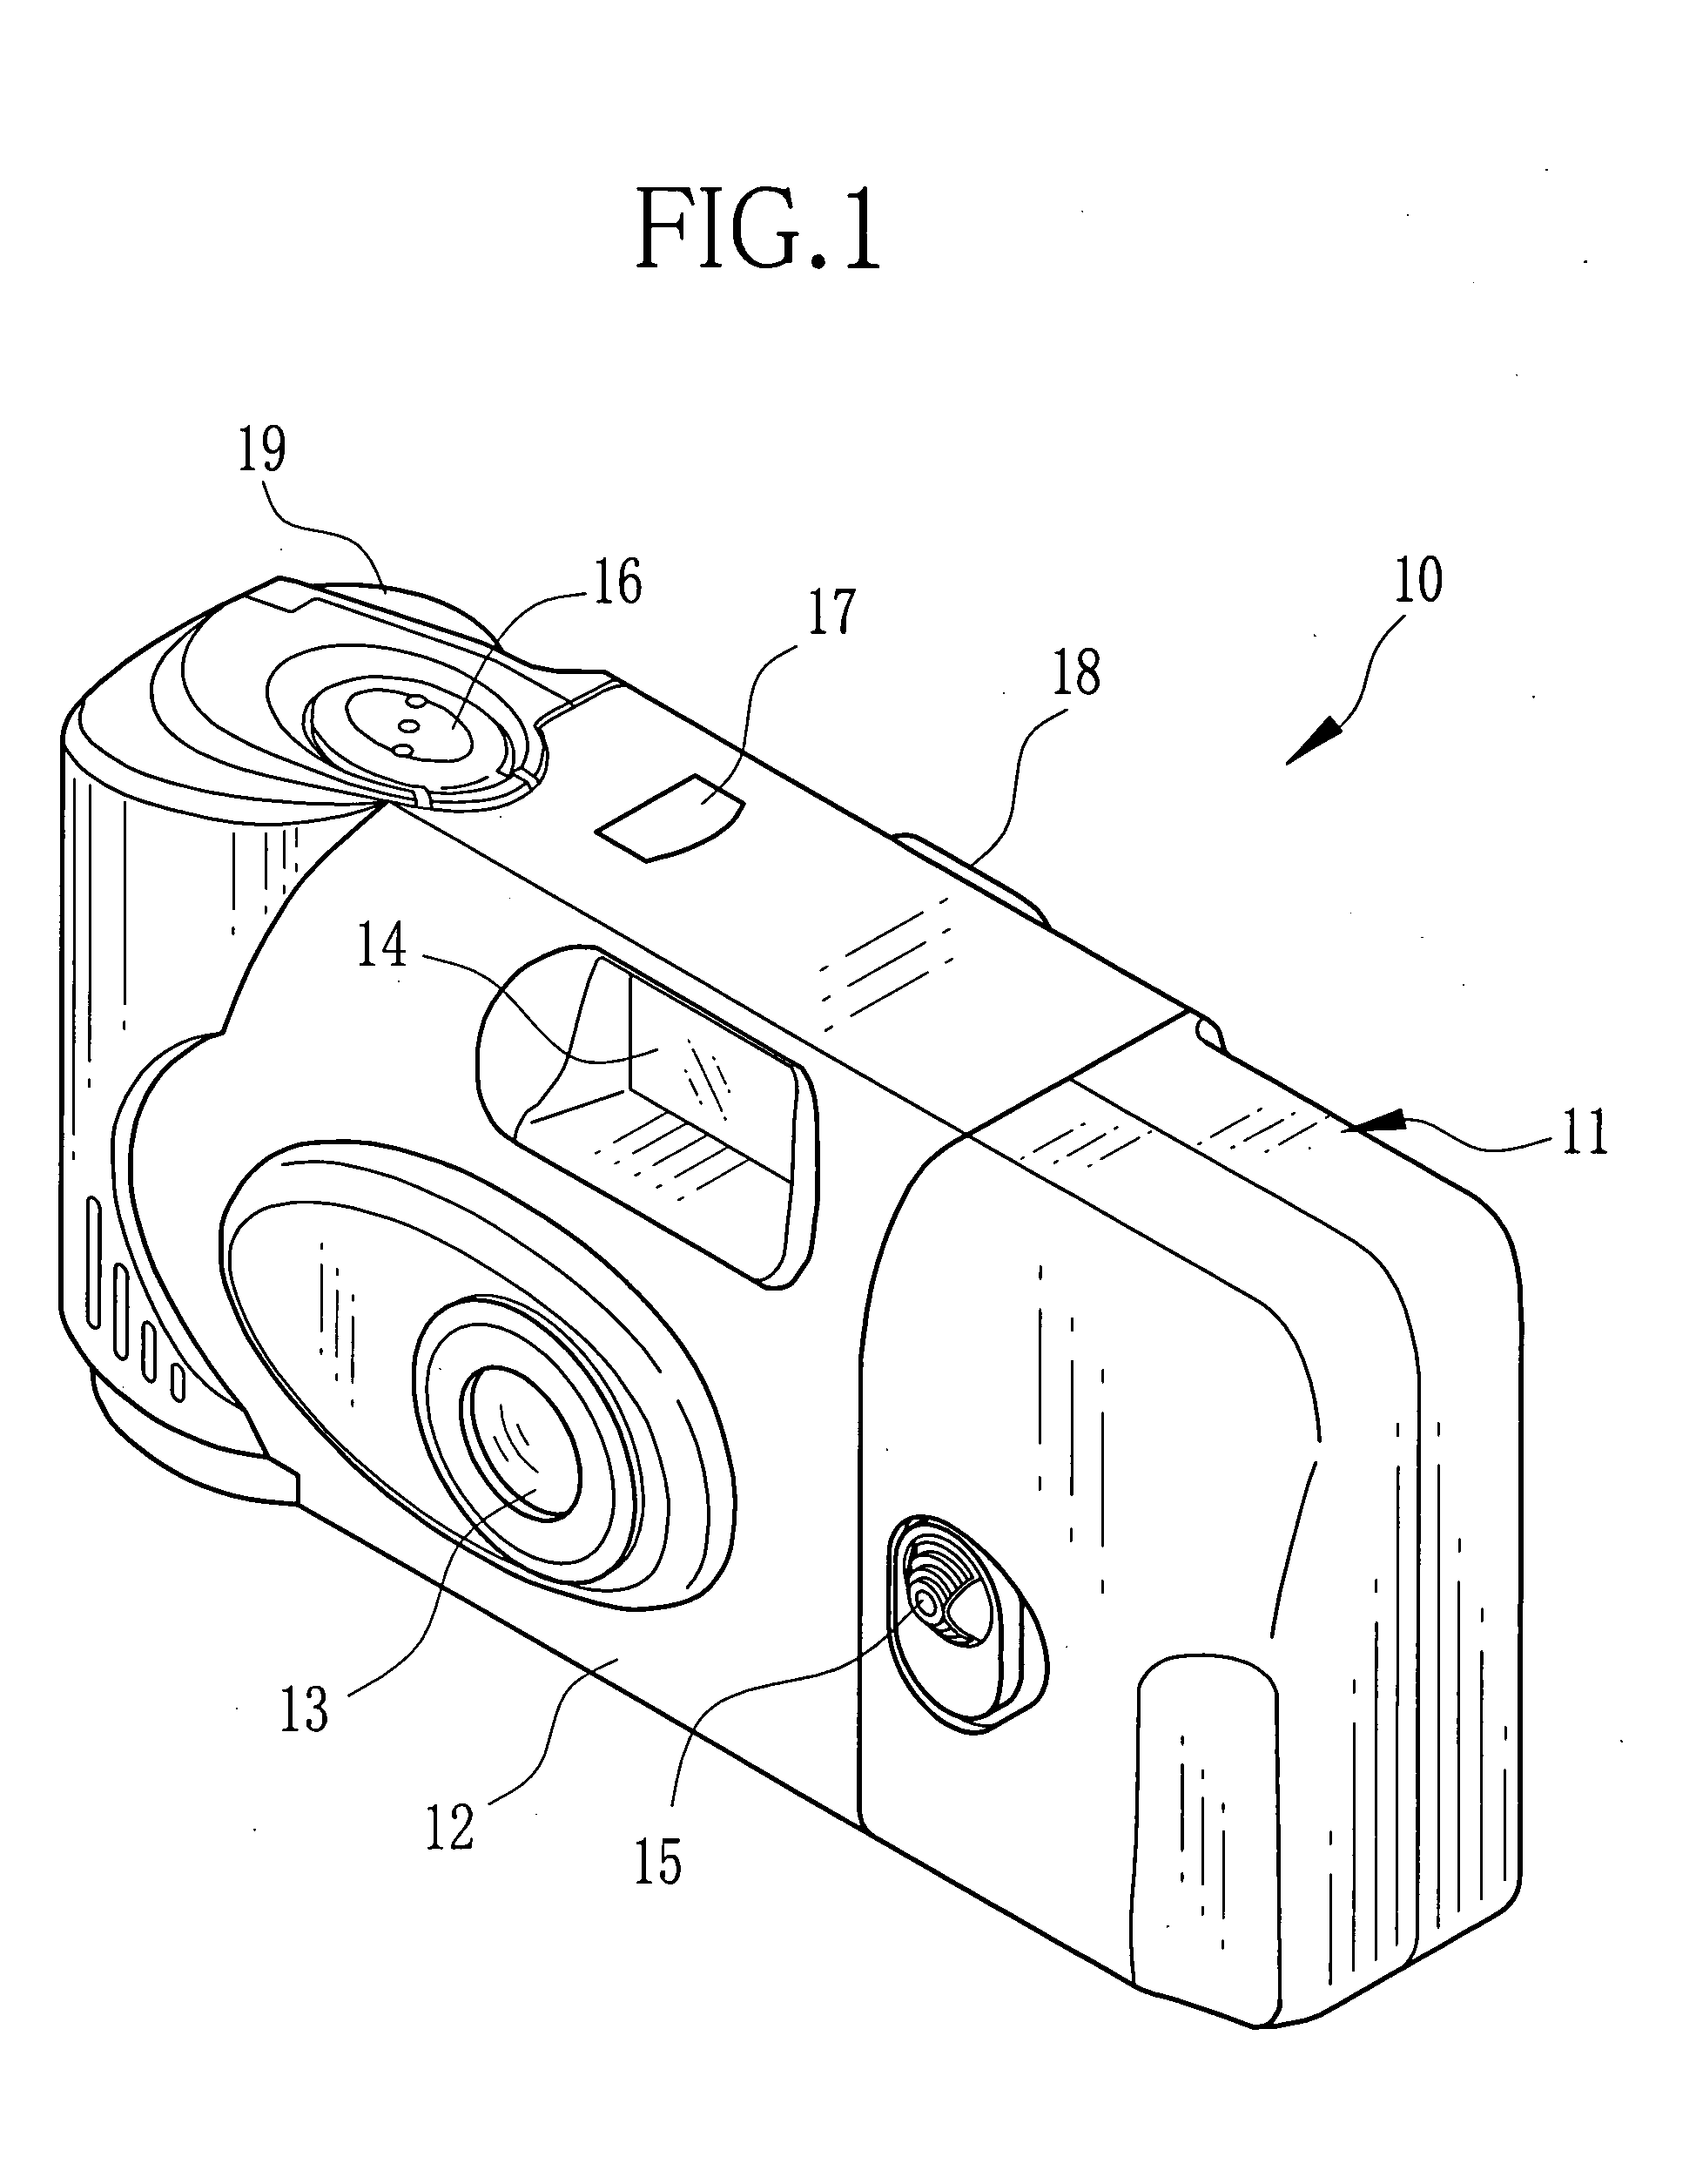 Lens-fitted photographic film unit